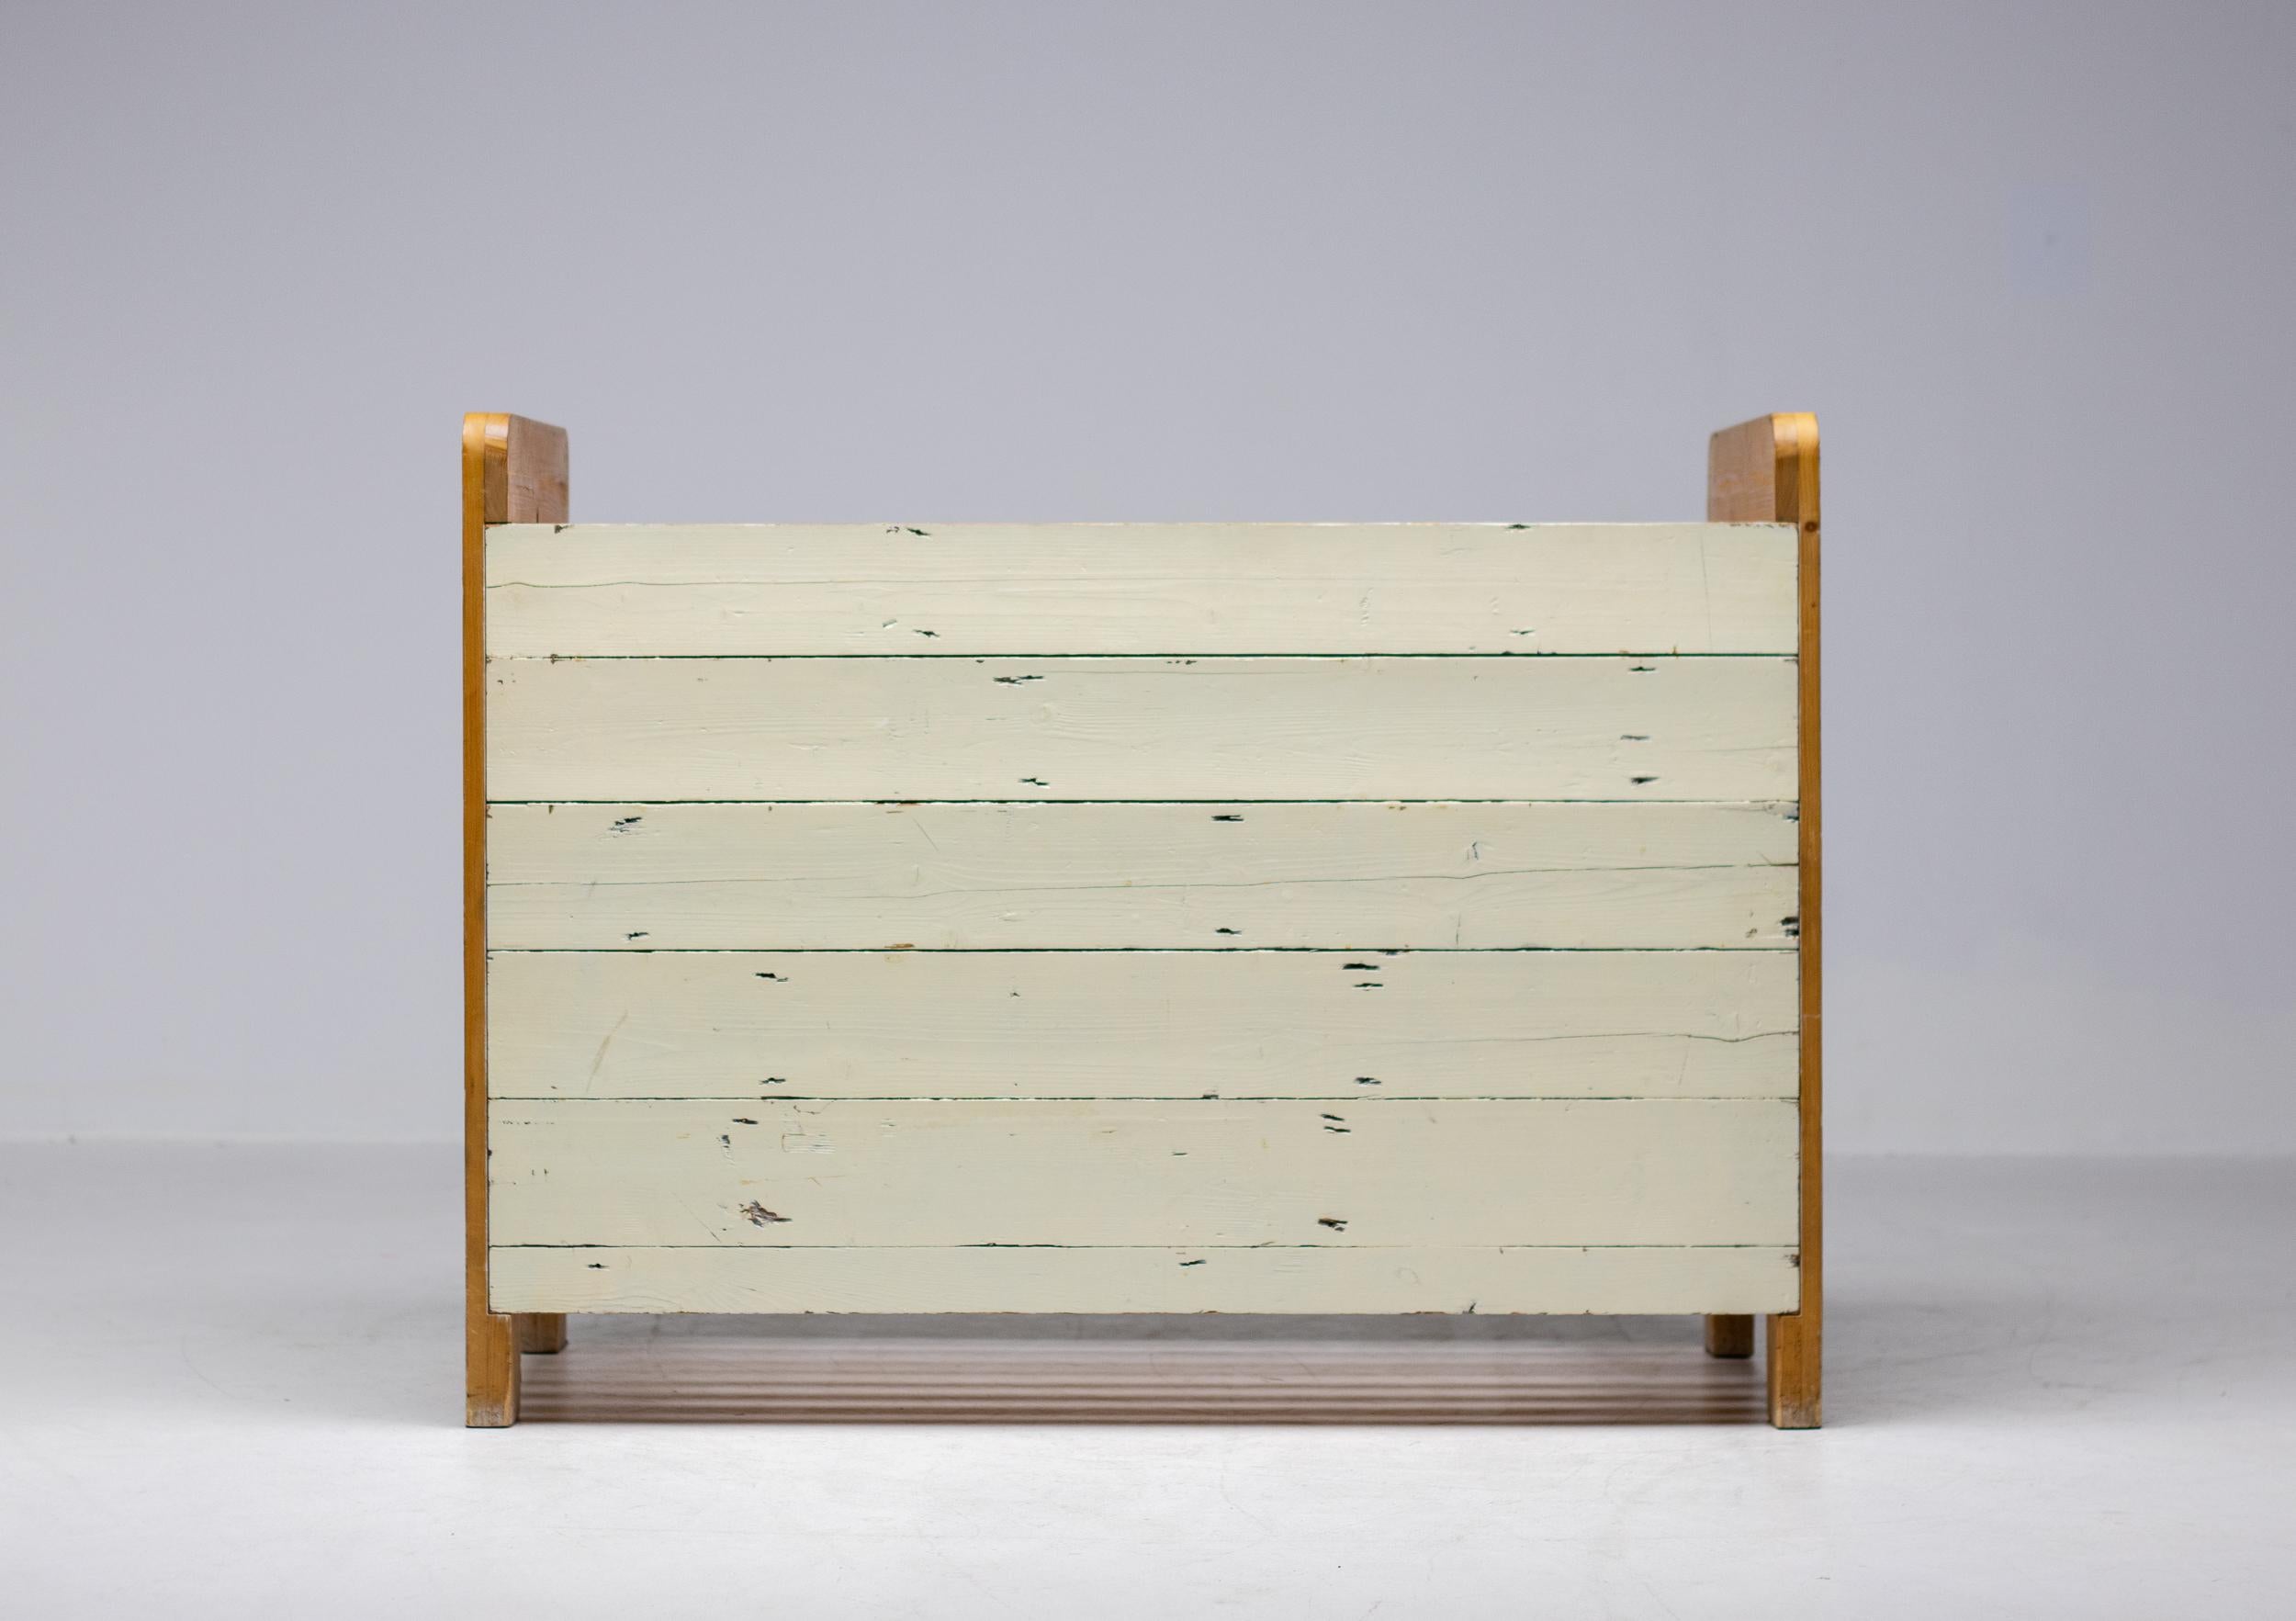 Cot in wonderful all original condition with adjustable height bottom.
Signature Piet Hein Eek sustainable scrap wood furniture.
Practical no-nonsense Dutch Design.

Piet Hein Eek is a Dutch designer and manufacturer, known for his sustainable and